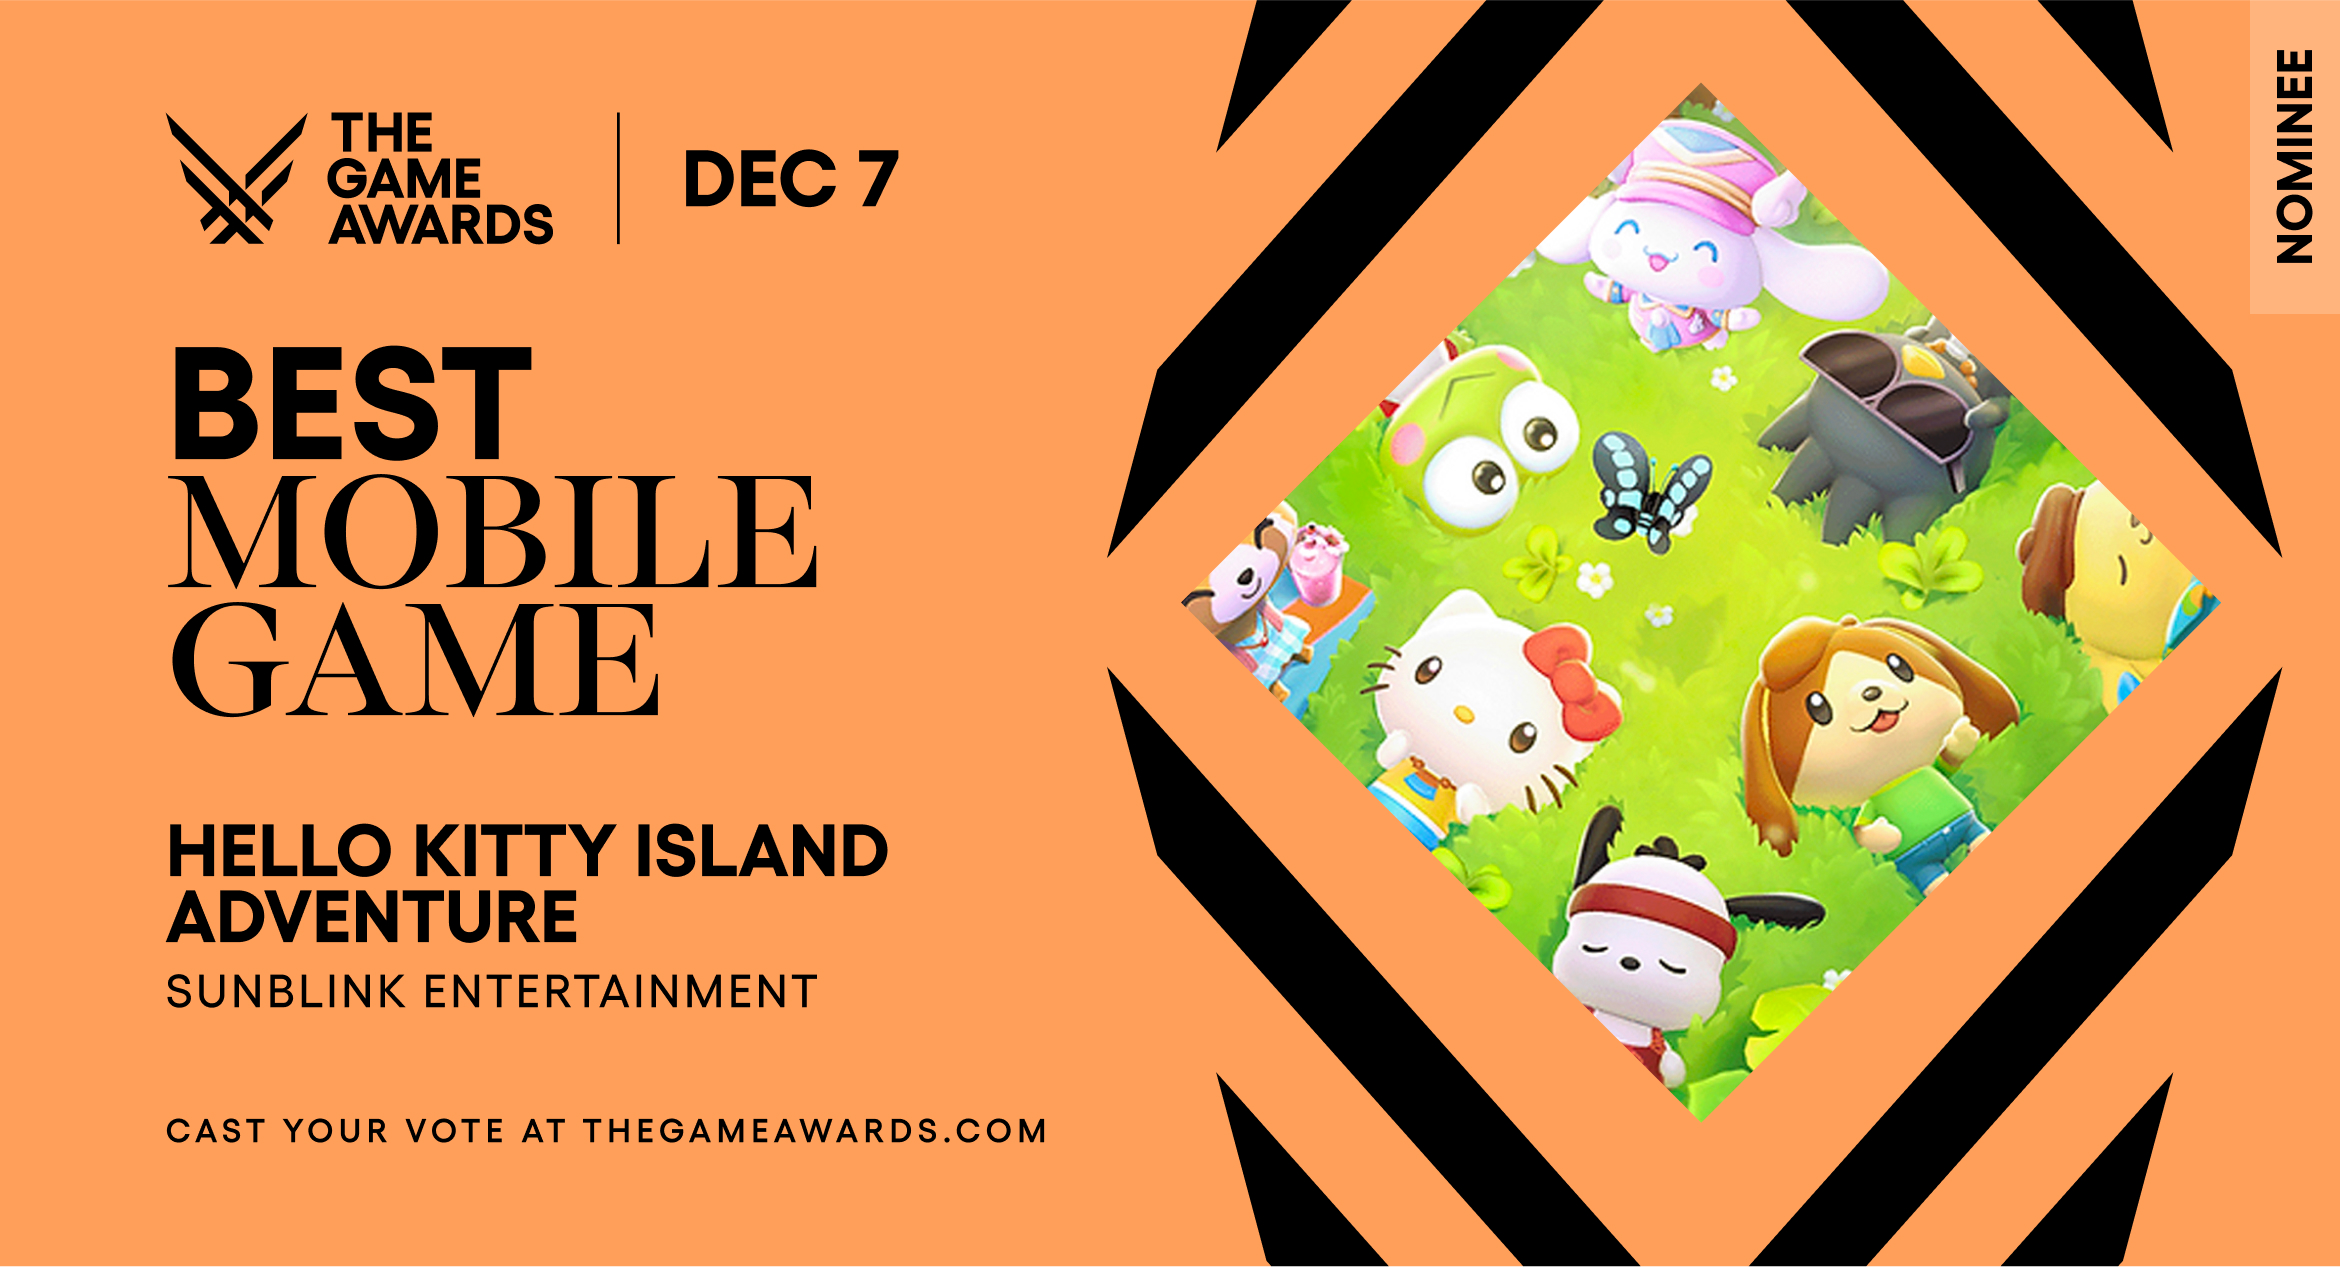 Hello Kitty Island Adventure' nominated at The Game Awards